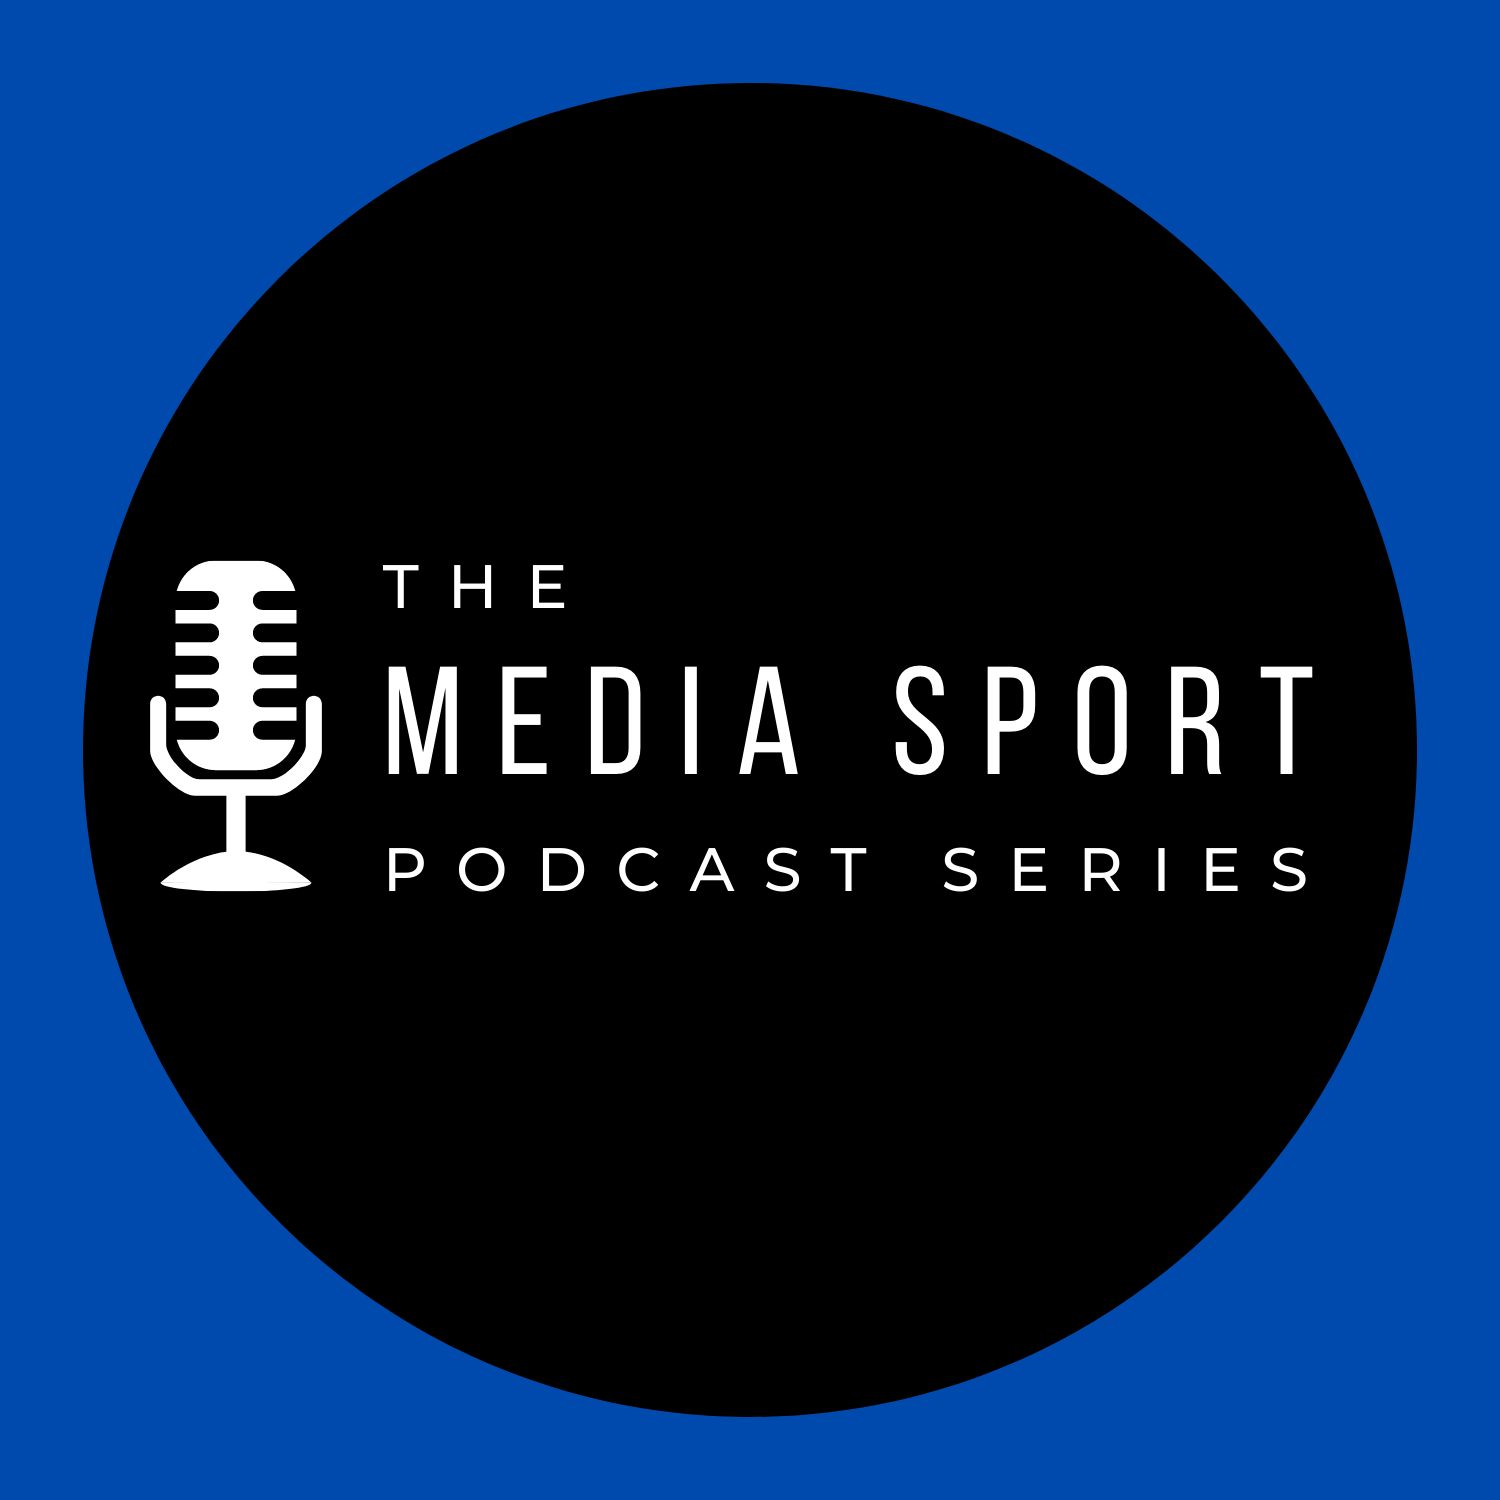 The Media Sport Podcast Series